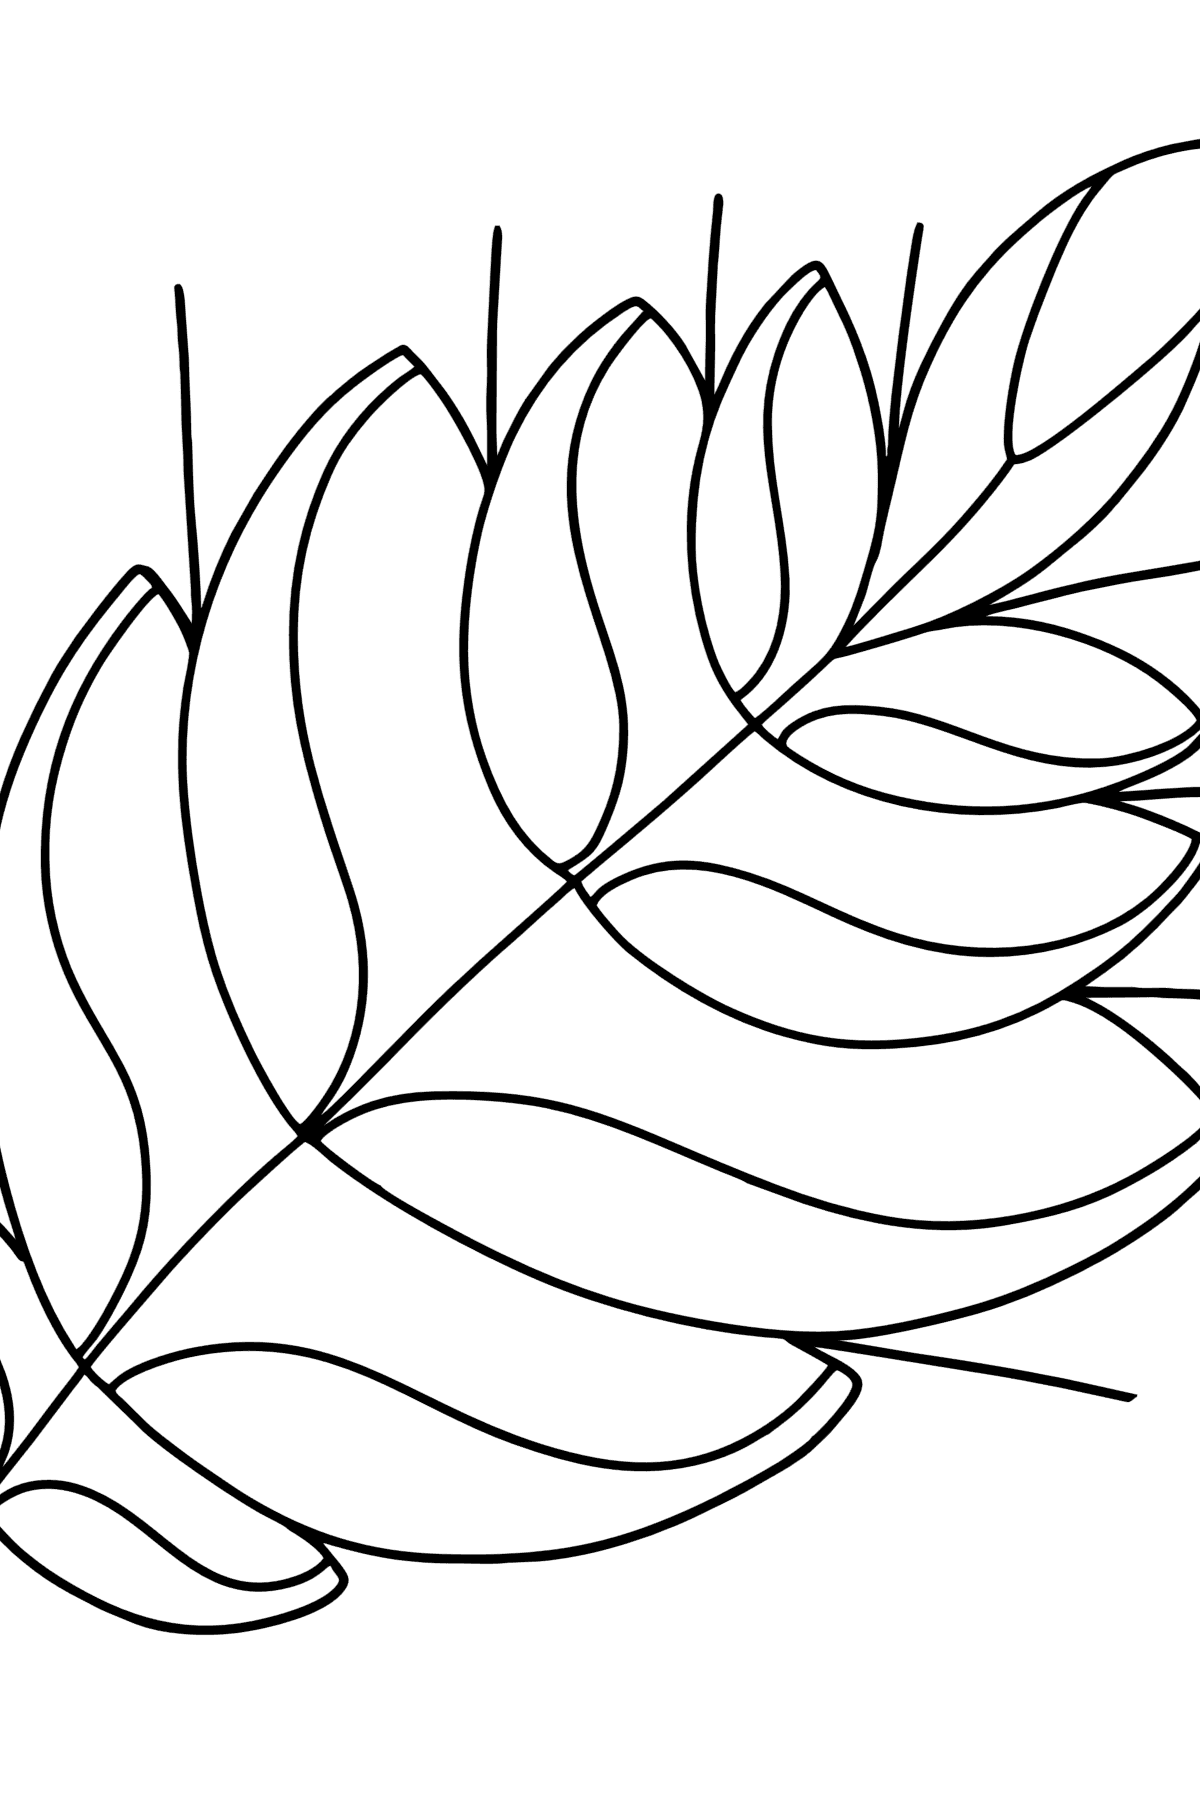 Ultra Relaxing coloring page - Coloring Pages for Kids